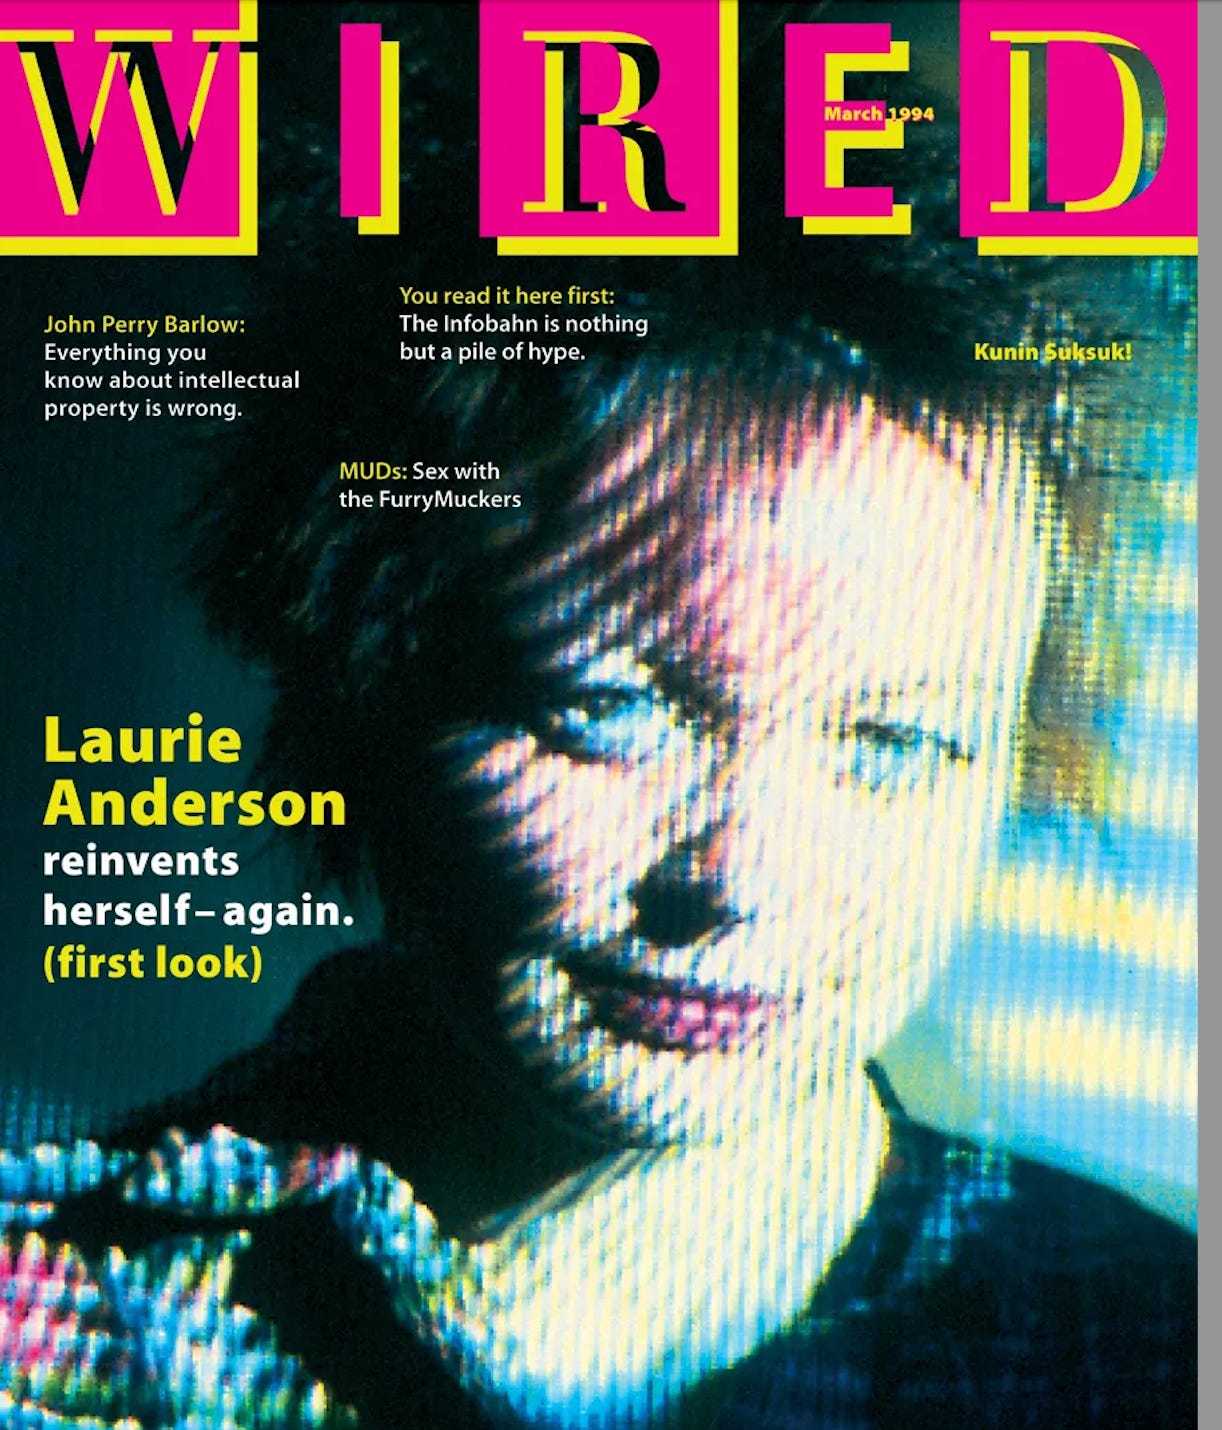 Wired magazine cover 1994